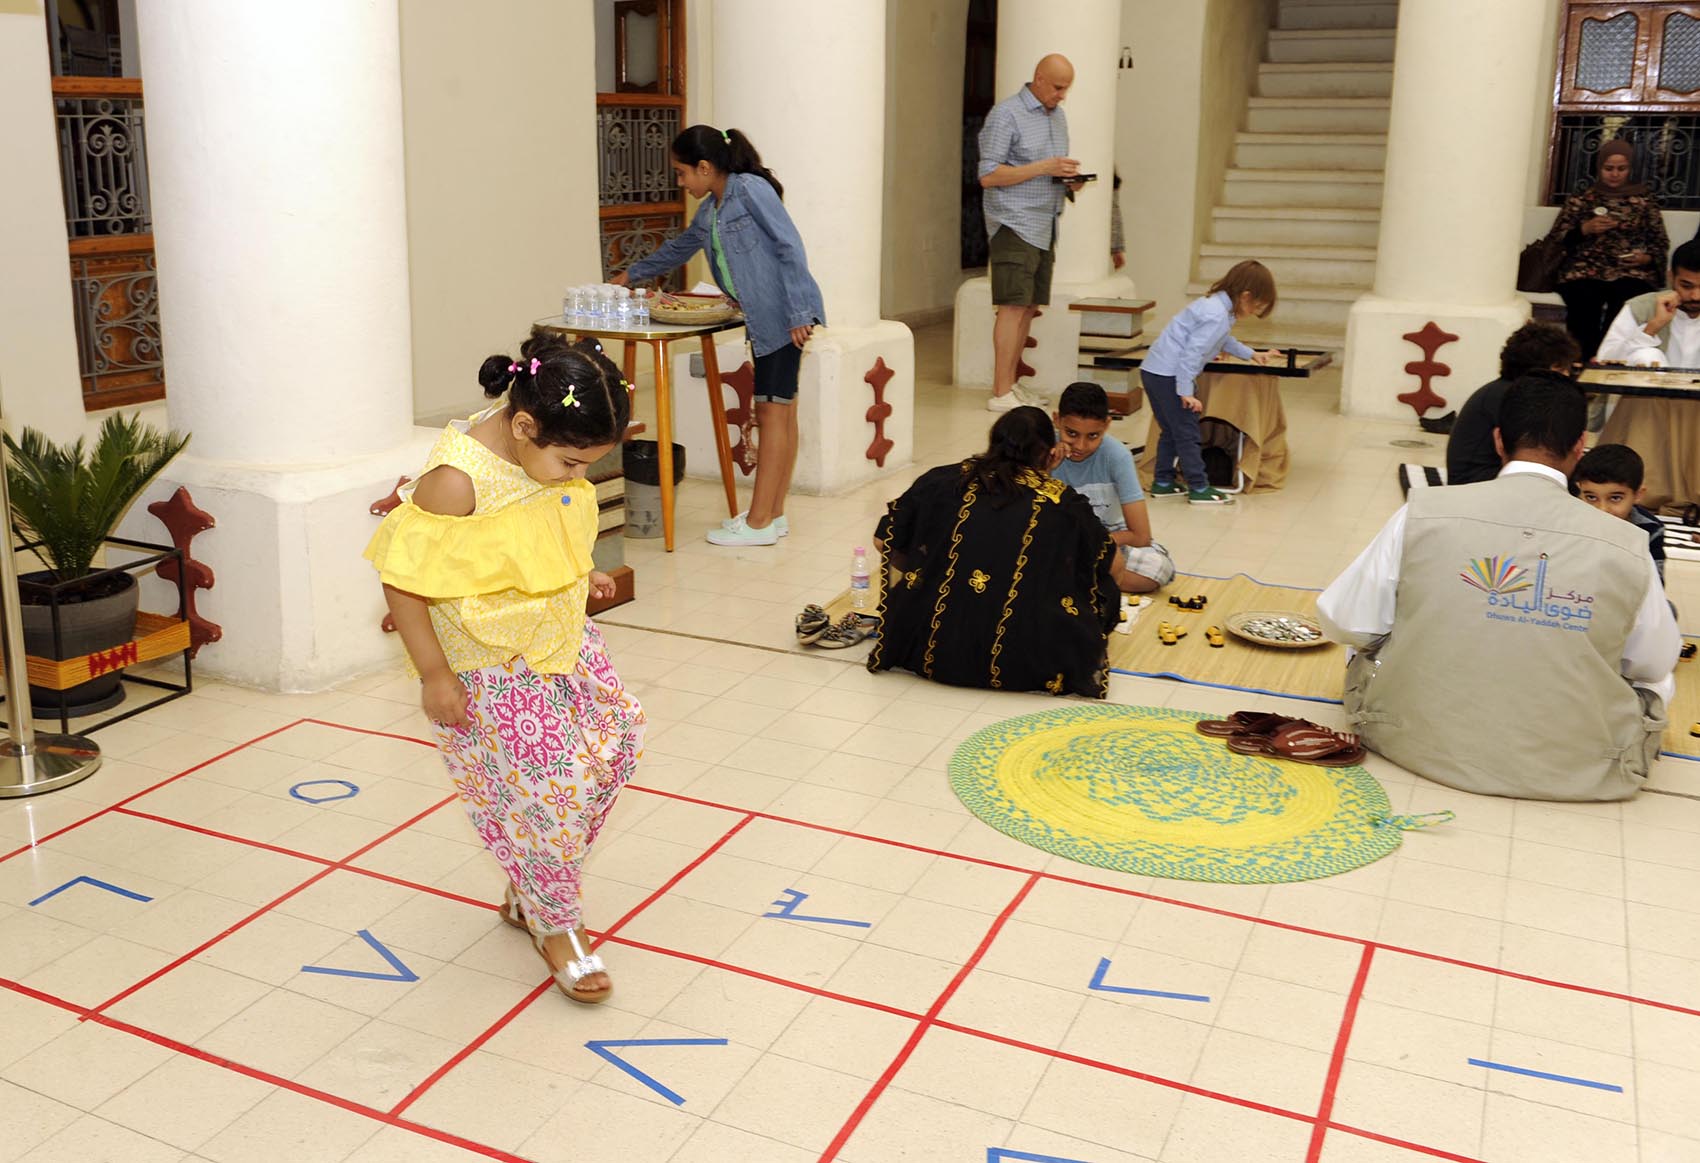 Children and their families spent an Open Day at the Sadu house